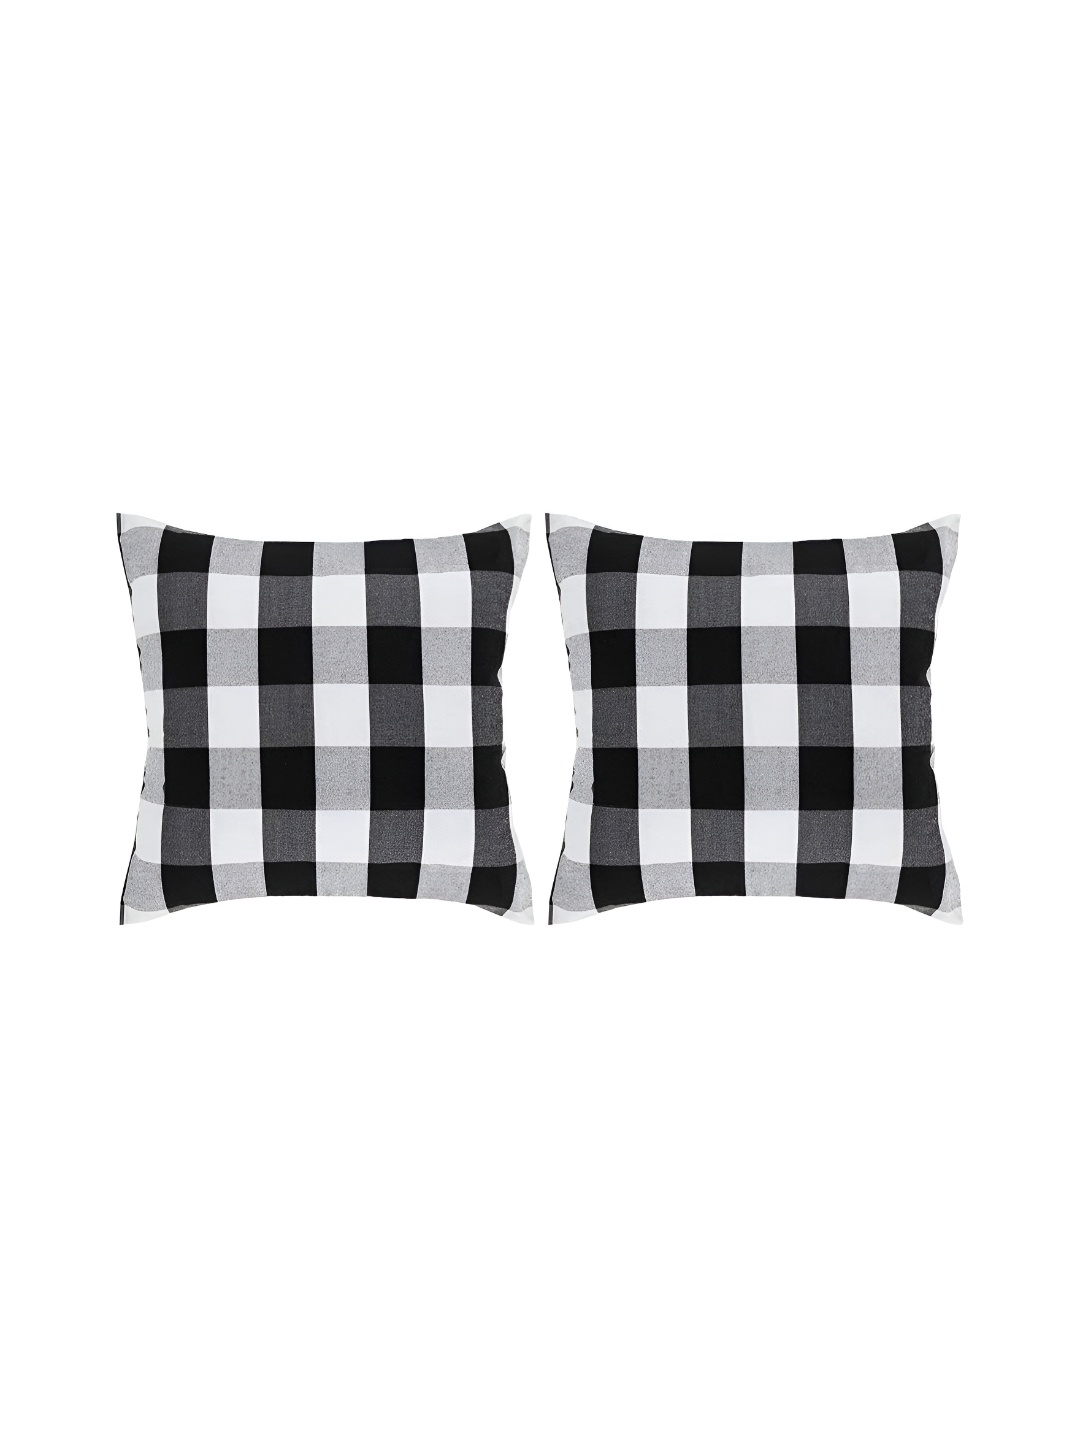 

BIRD WING Black & White 2 Pcs Checked Square Cushion Covers